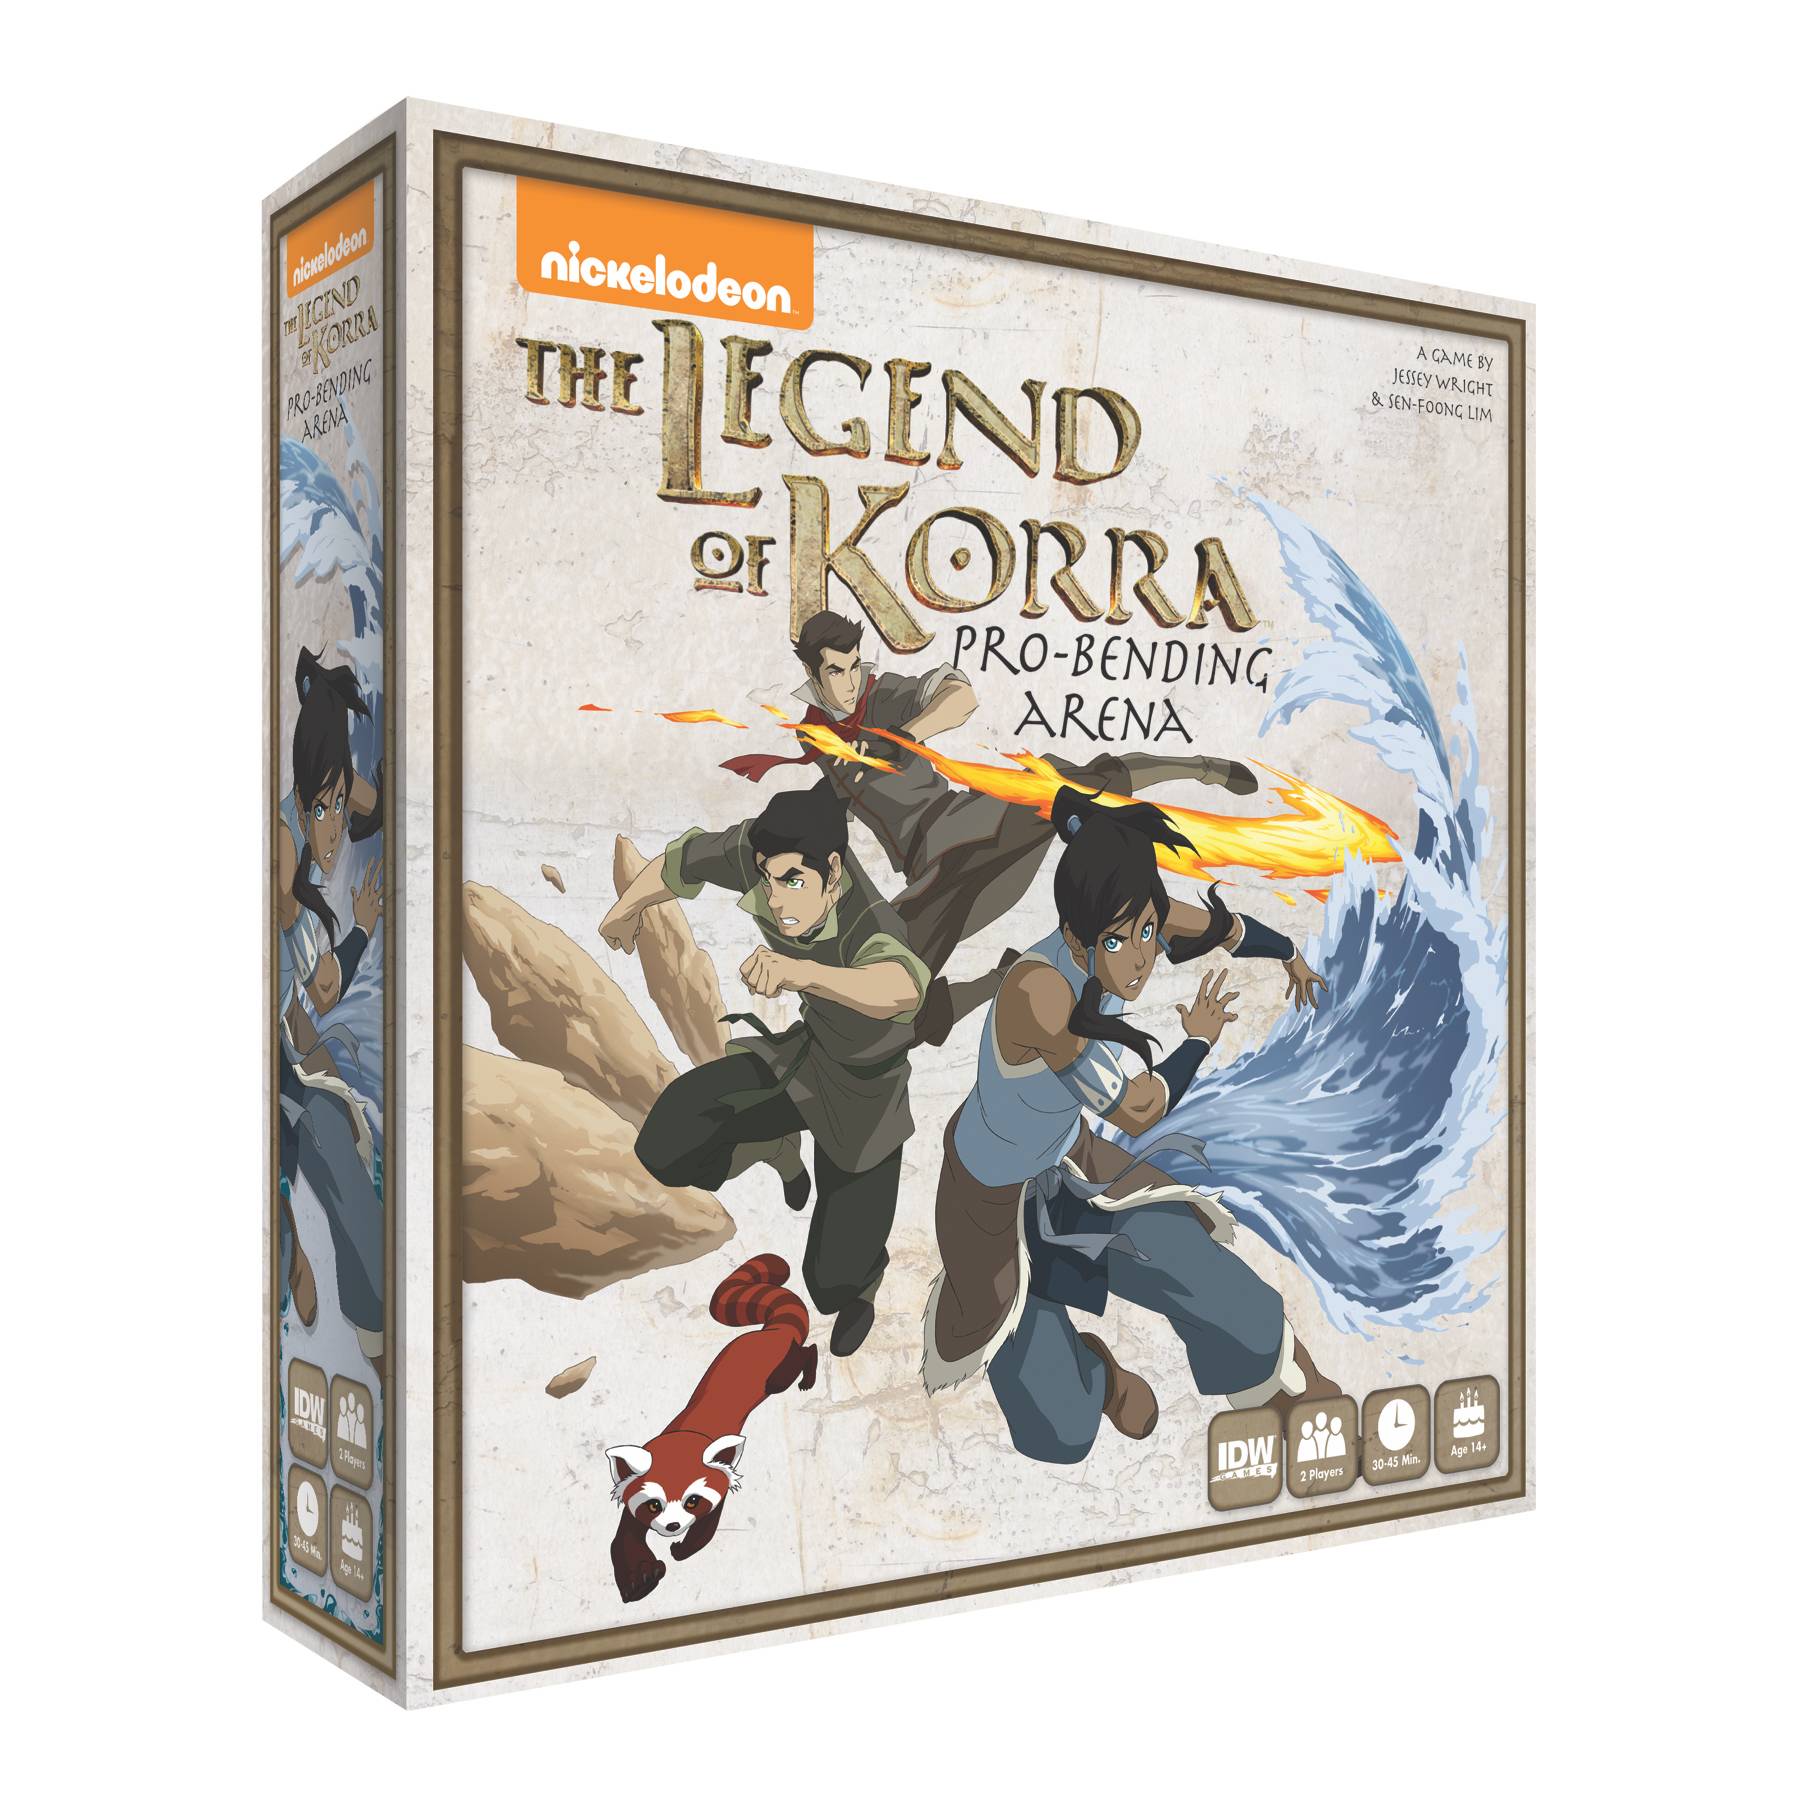 The Legend of Korra Video Game Released Date and New Mode